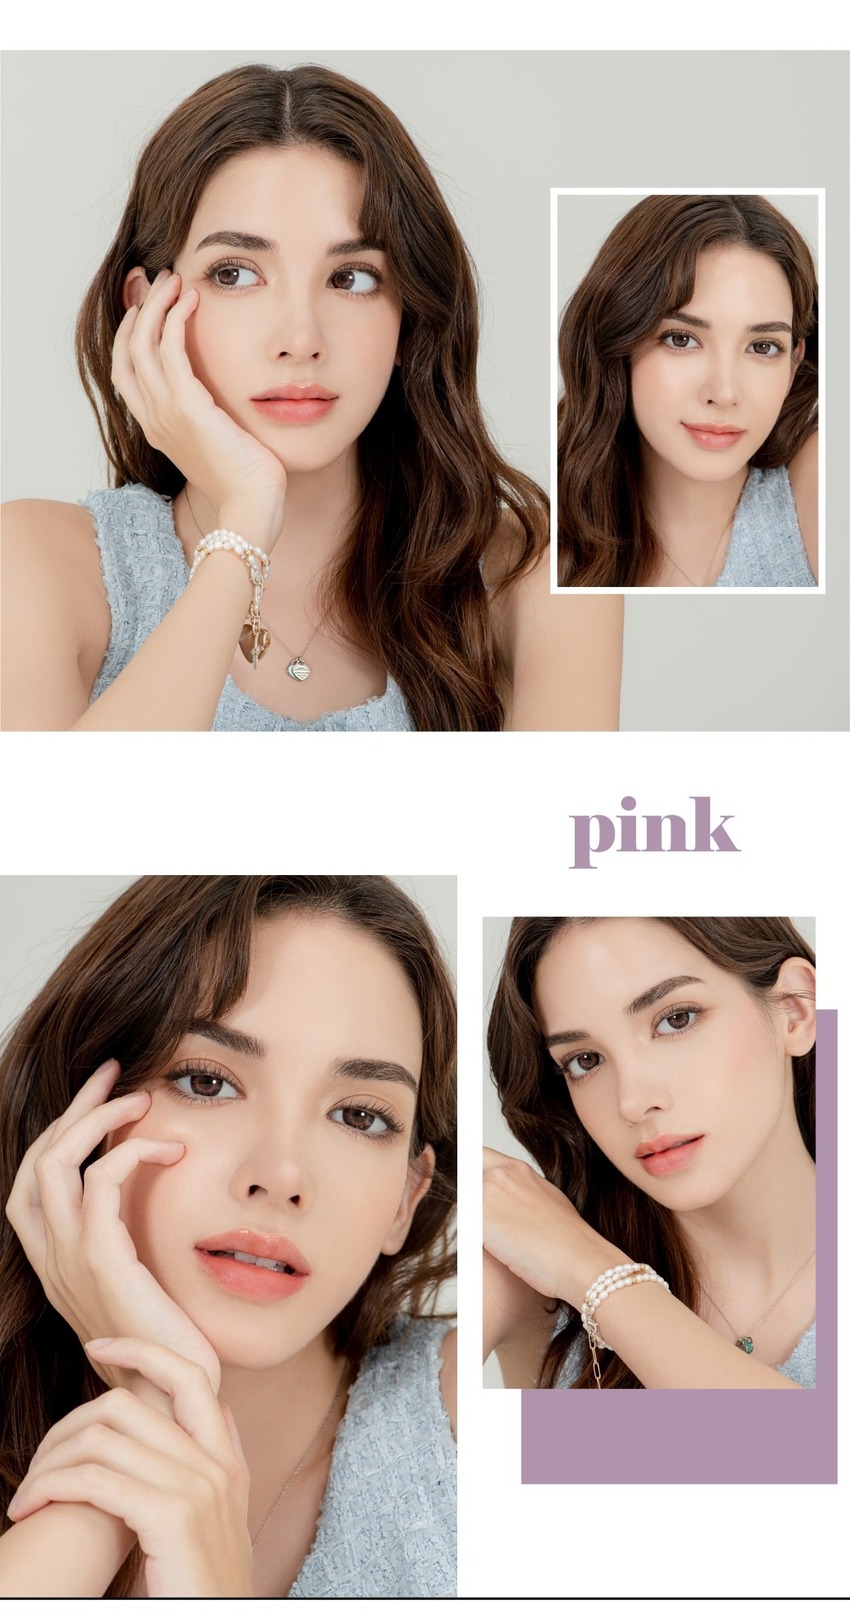 
Dive into the world of colored contacts with Lensrang Puella.